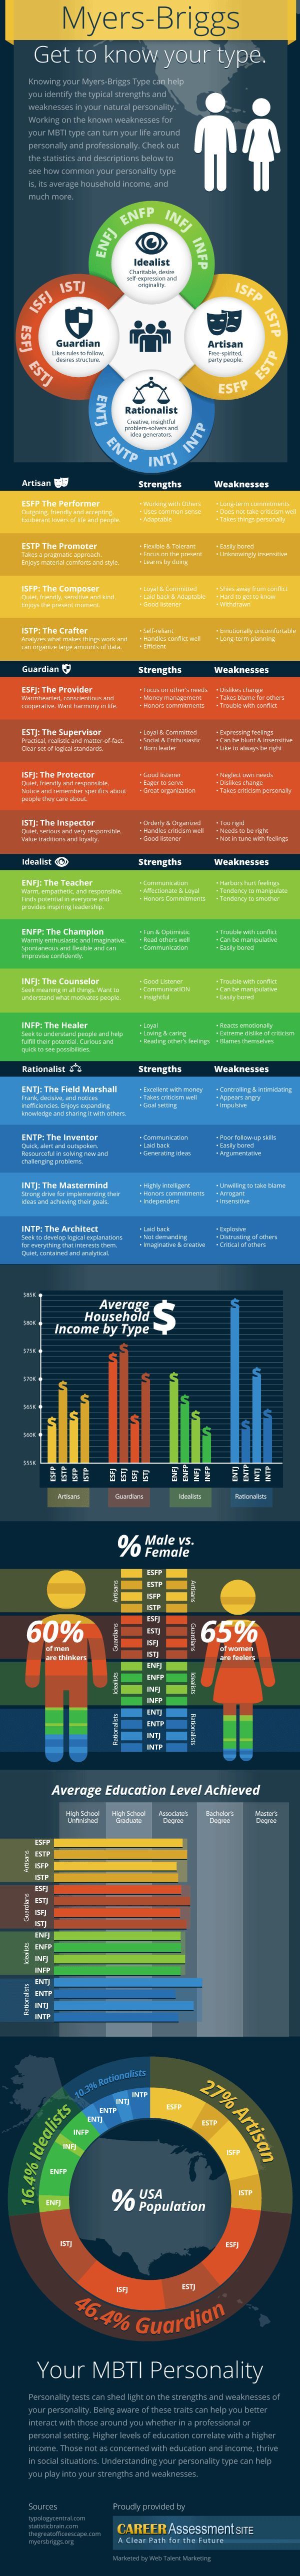 1556440387_712_Infographic-Can-Your-Personality-Type-Affect-Your-Income Infographic : Can Your Personality Type Affect Your Income?